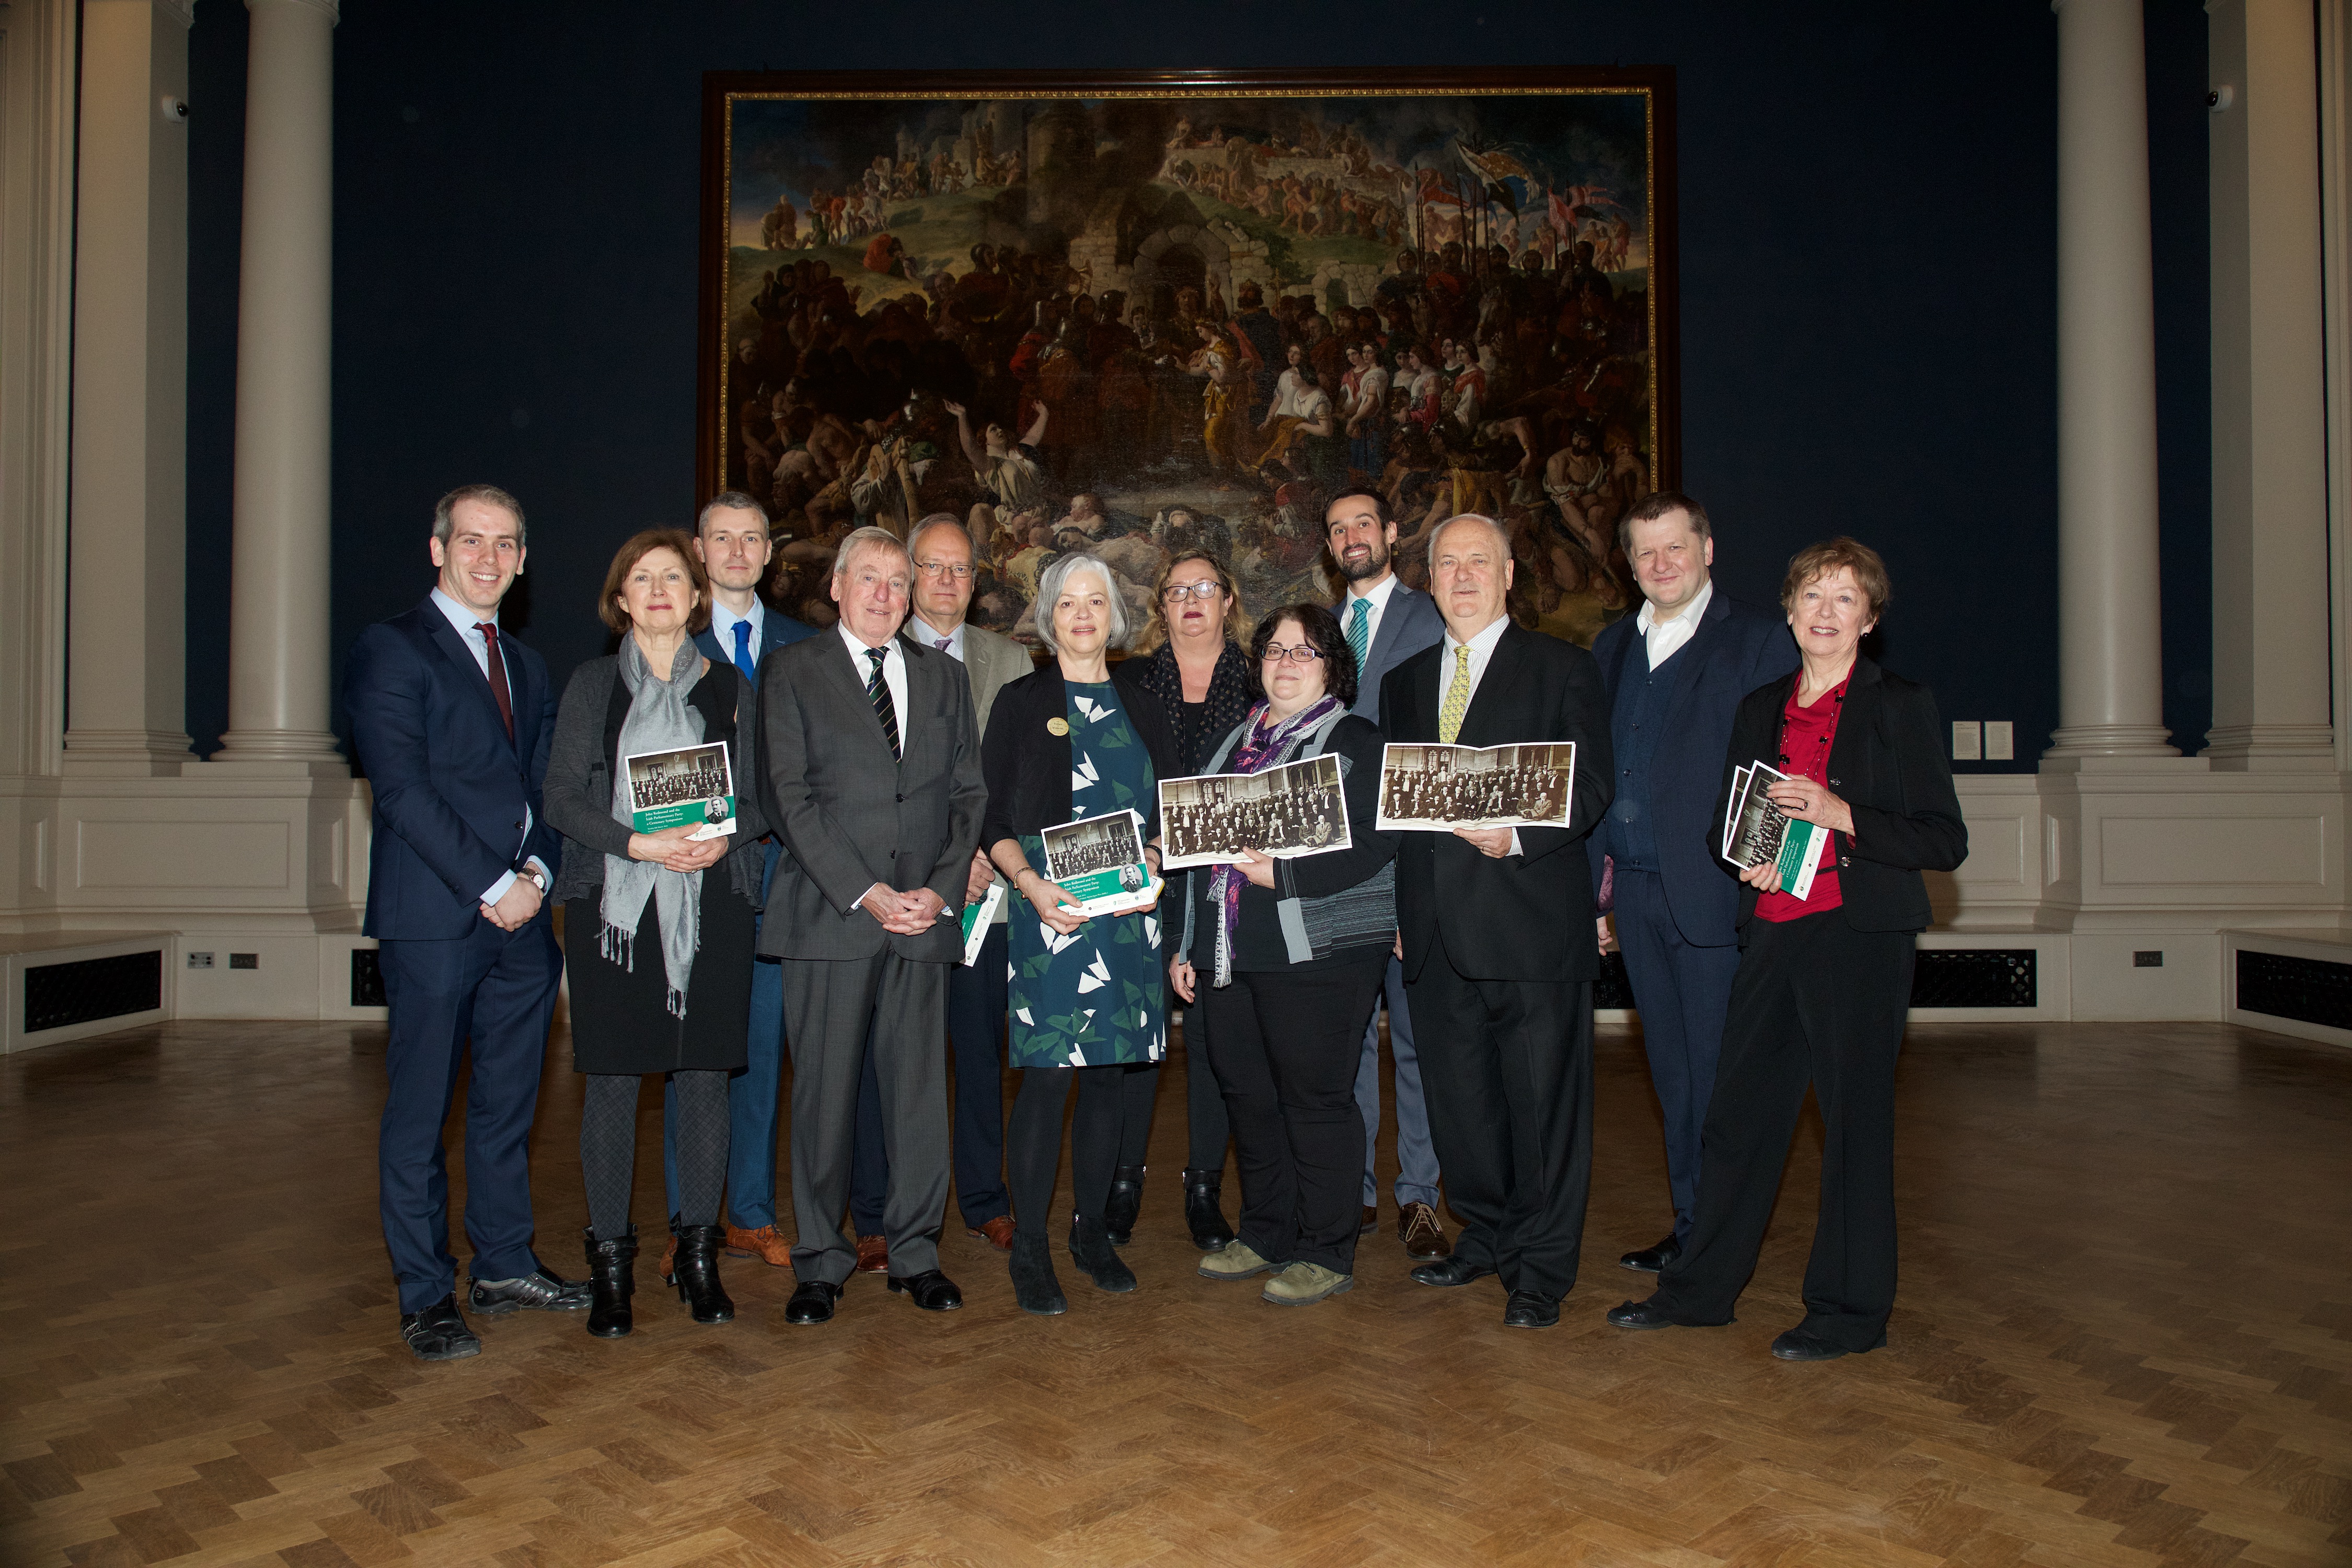 Dr Maurice Manning, Chancellor of NUI and Dr Attracta Halpin, Registrar of NUI, pictured here with speakers and chairpersons at John Redmond and the Irish Parliamentary Party: A Centenary Symposium:  Dr Martin O’Donoghue, Dr Colin Reid, Dr Michael Wheatley, Dr Margaret O’Callaghan, Dr Conor Mulvagh, Former Taoiseach John Bruton, Professor Alvin Jackson (Royal Irish Academy Discourse Speaker), Professor Marianne Elliott,  Dr Margaret Ward and Dr Mary McAuliffe.